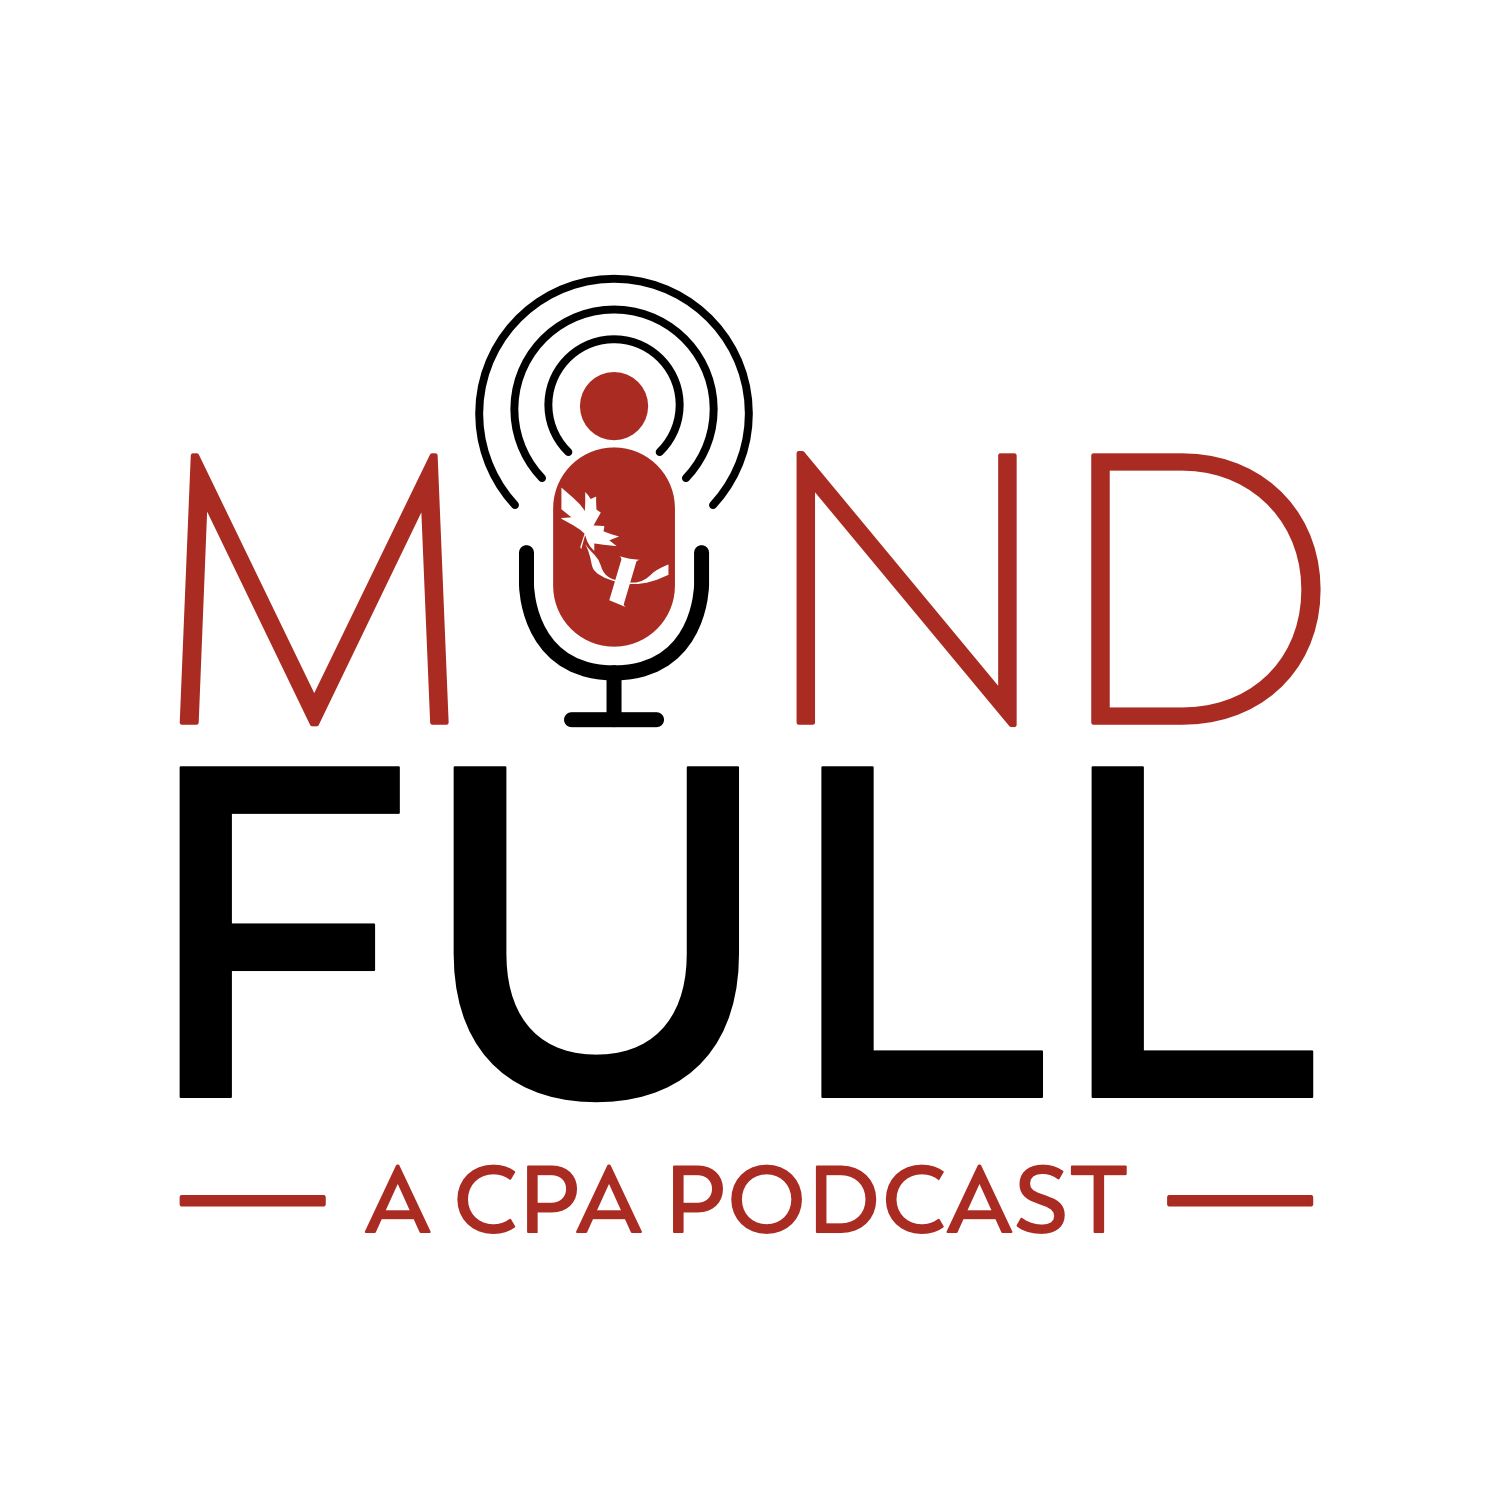 Stream Mind Full: The CPA podcast | Listen to podcast episodes online for free on SoundCloud